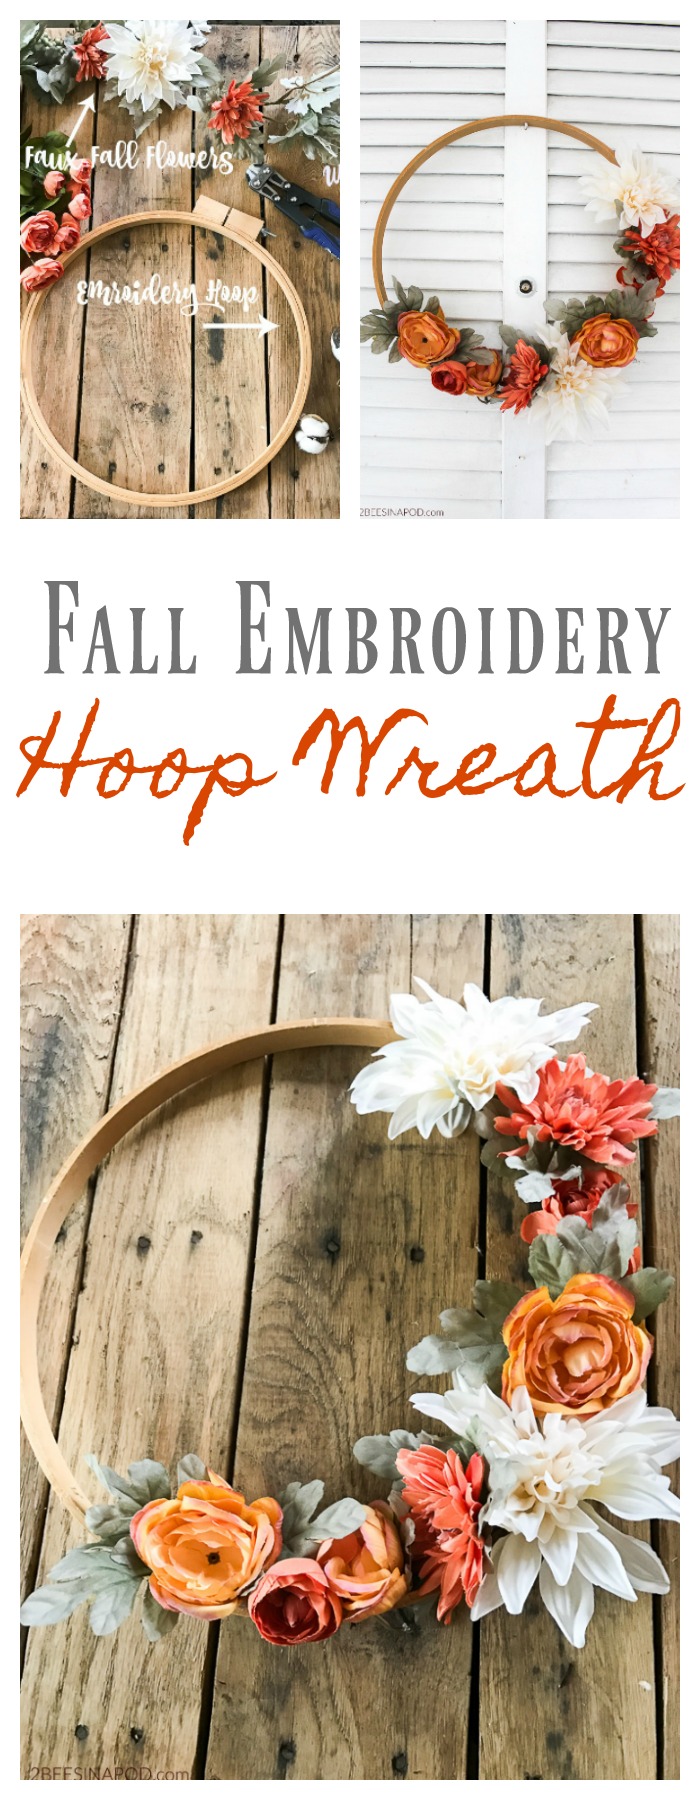 Fall Embroidery Hoop wreath - easy to make fall wreath for the front door